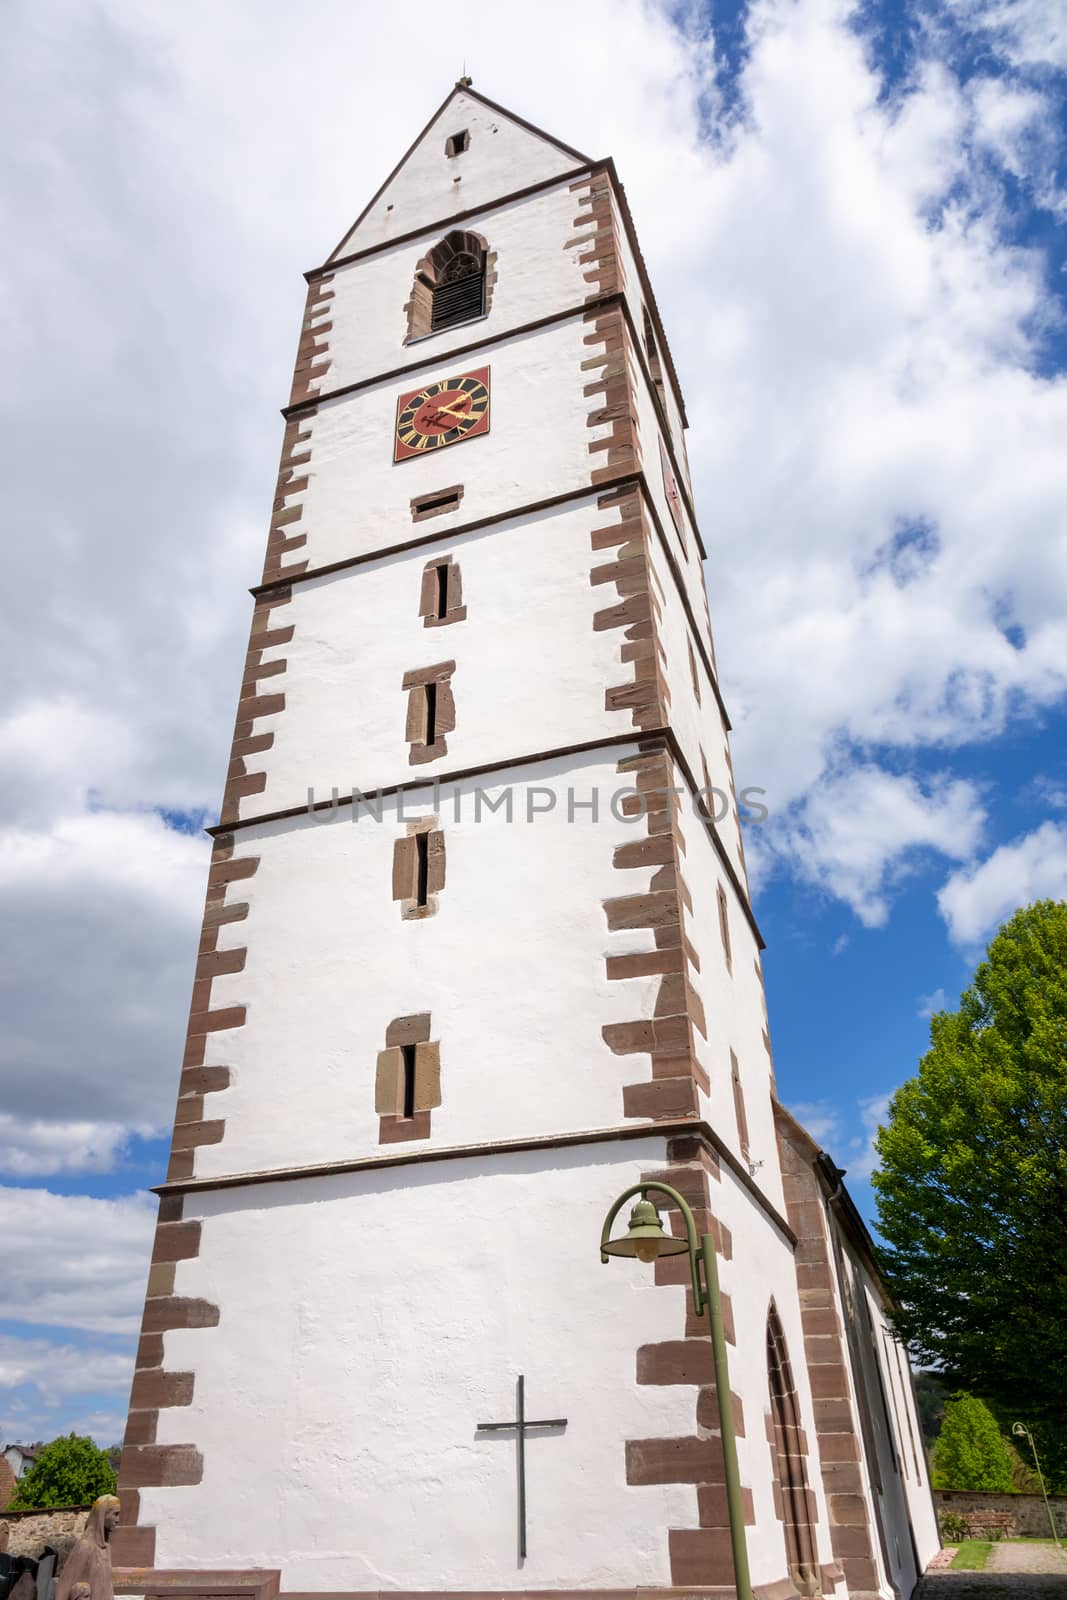 An image of the fortified church at Bergfelden south Germany